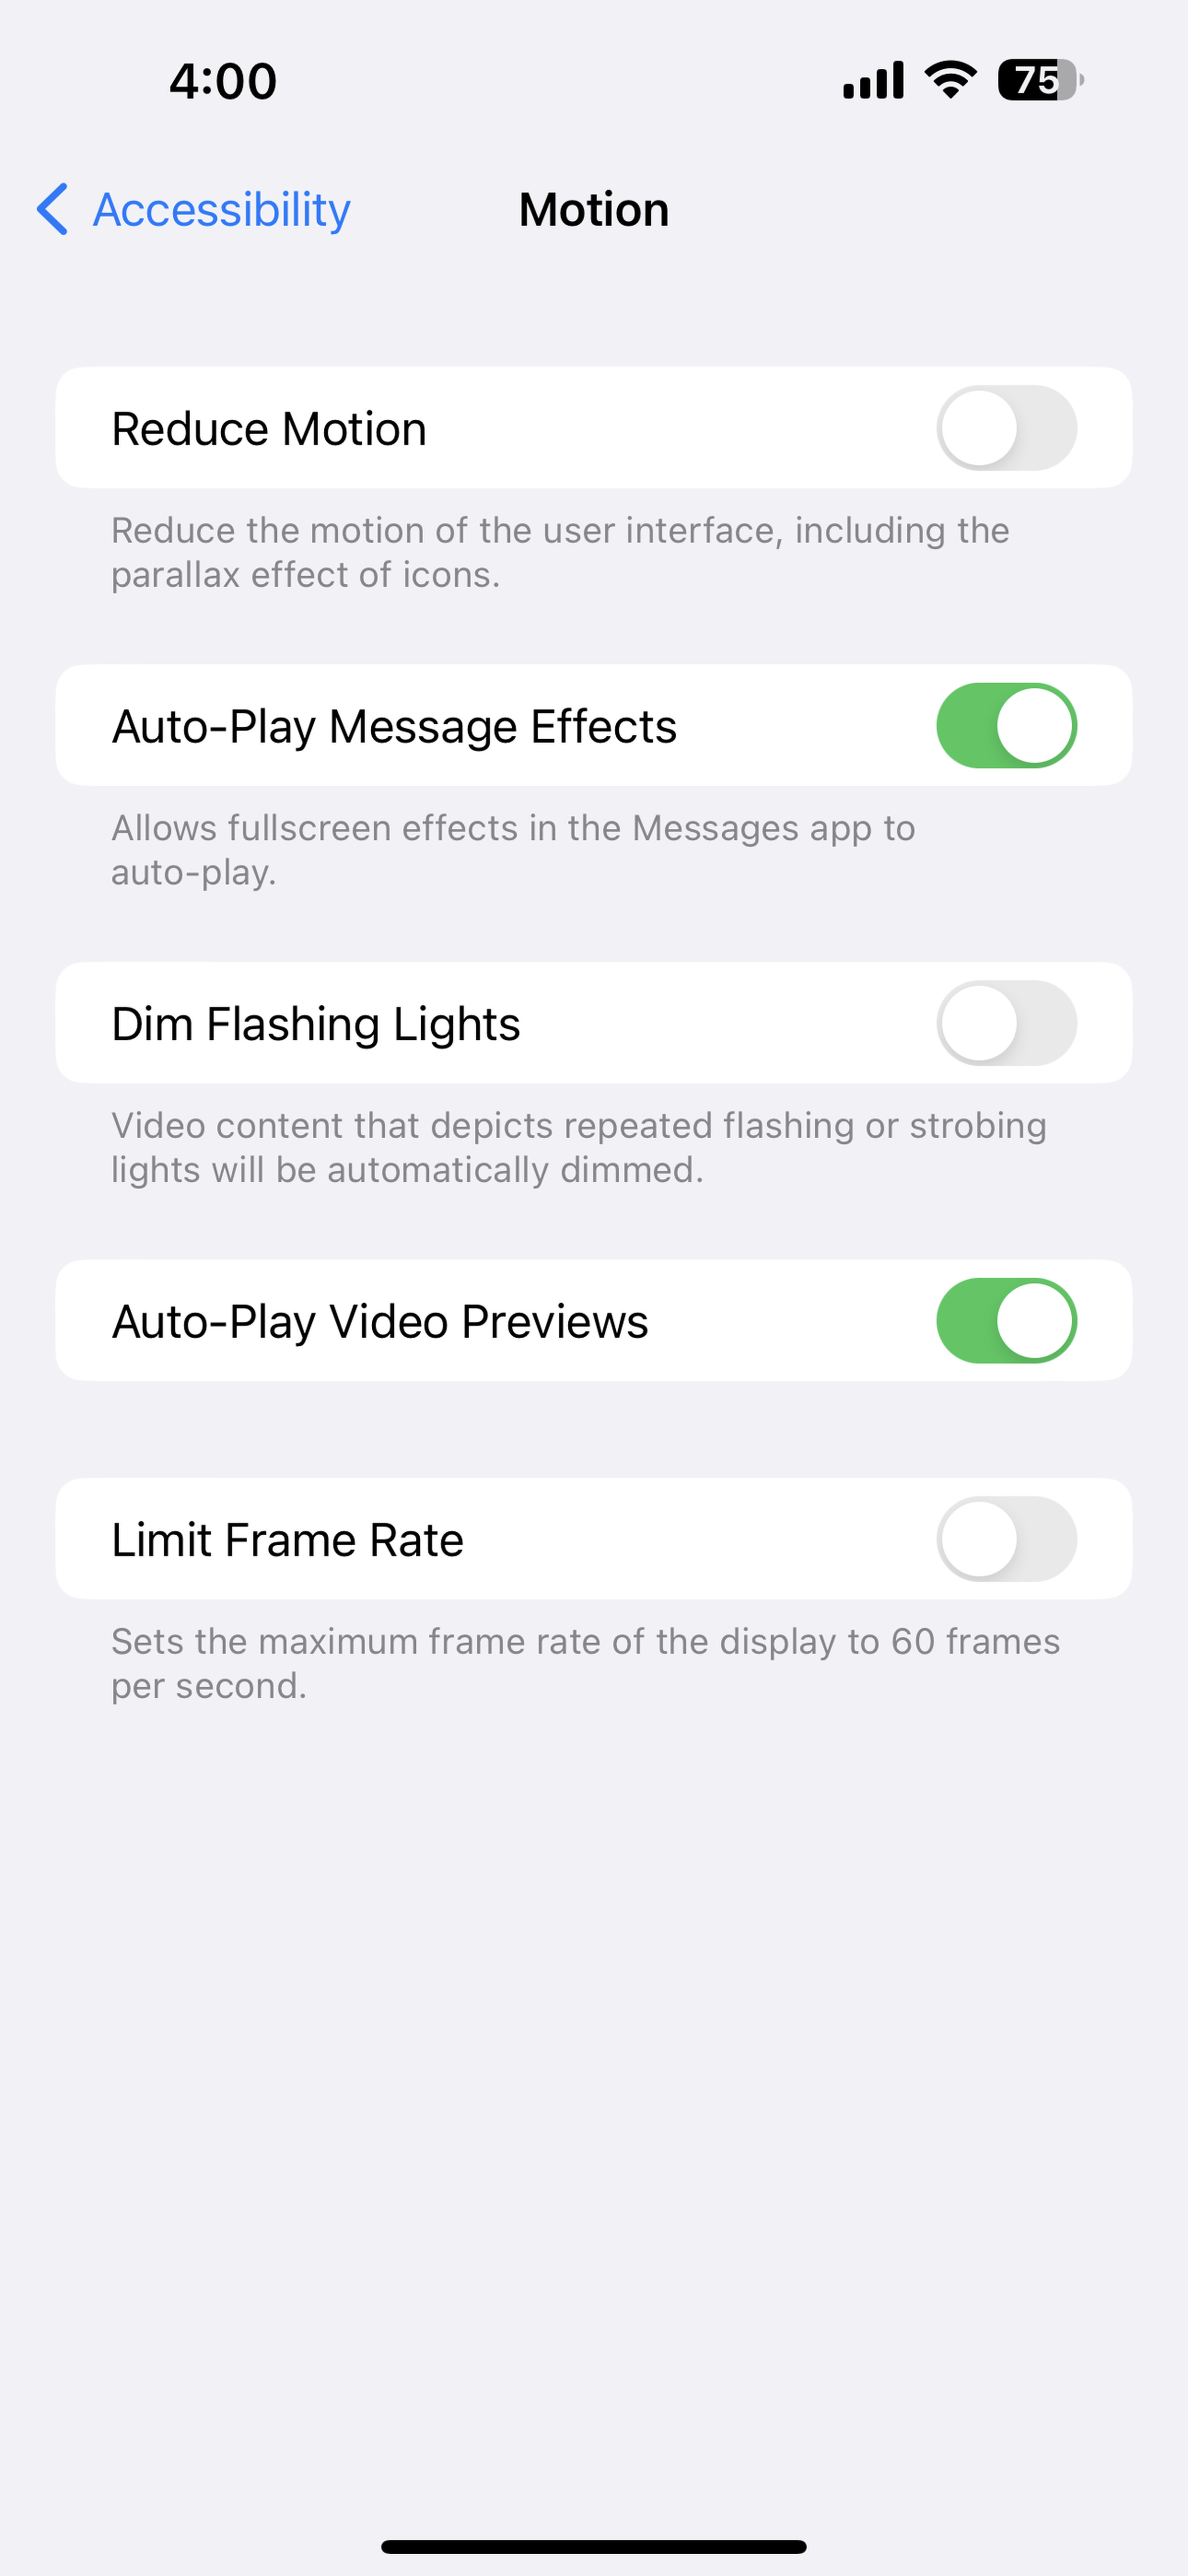 iPhone screen headed Motion showing various features, including Limit Frame Rate.